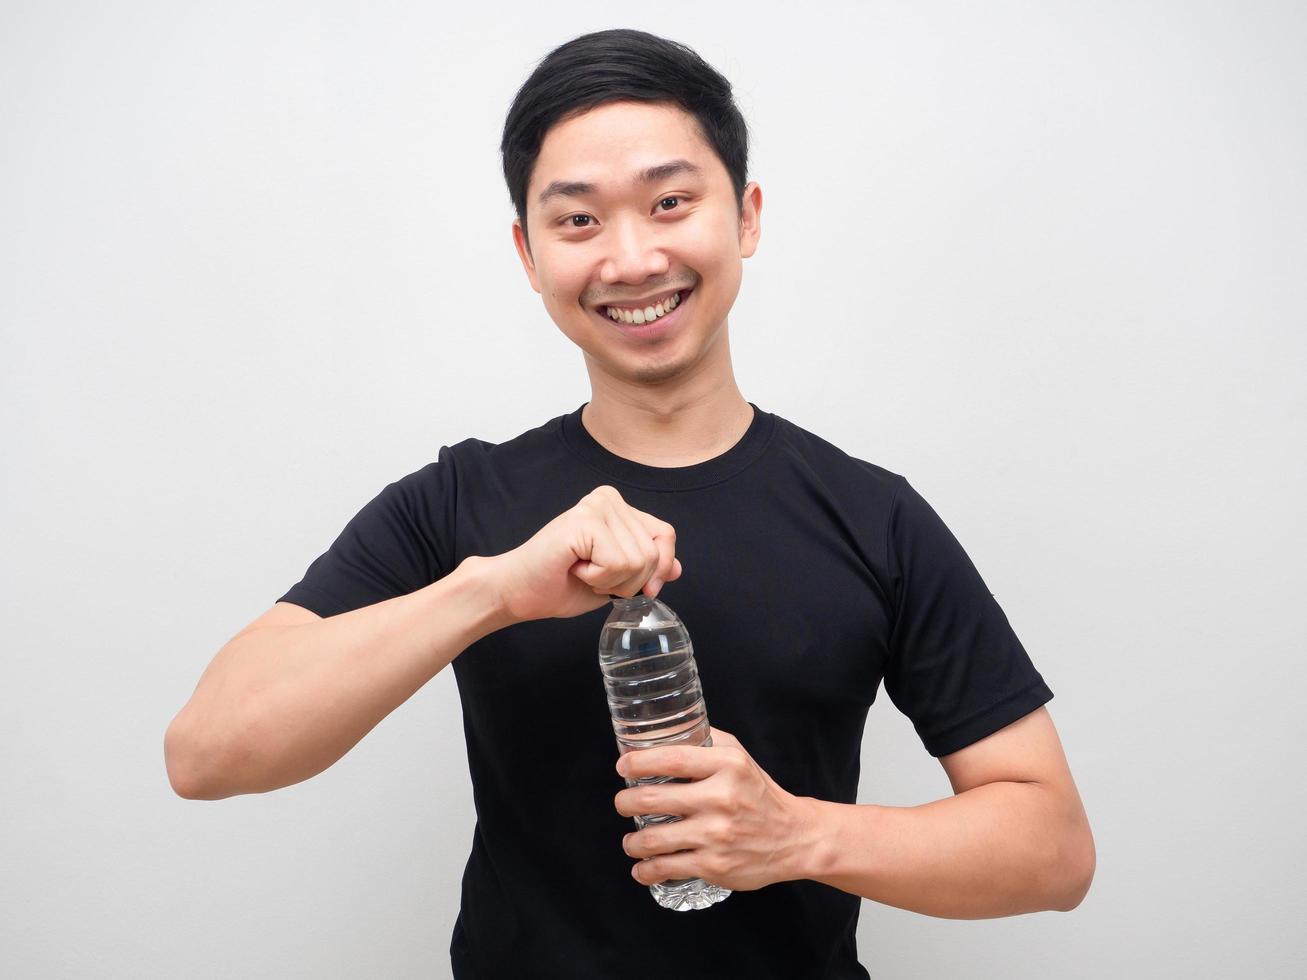 Asian man happy smile openning water bottle photo